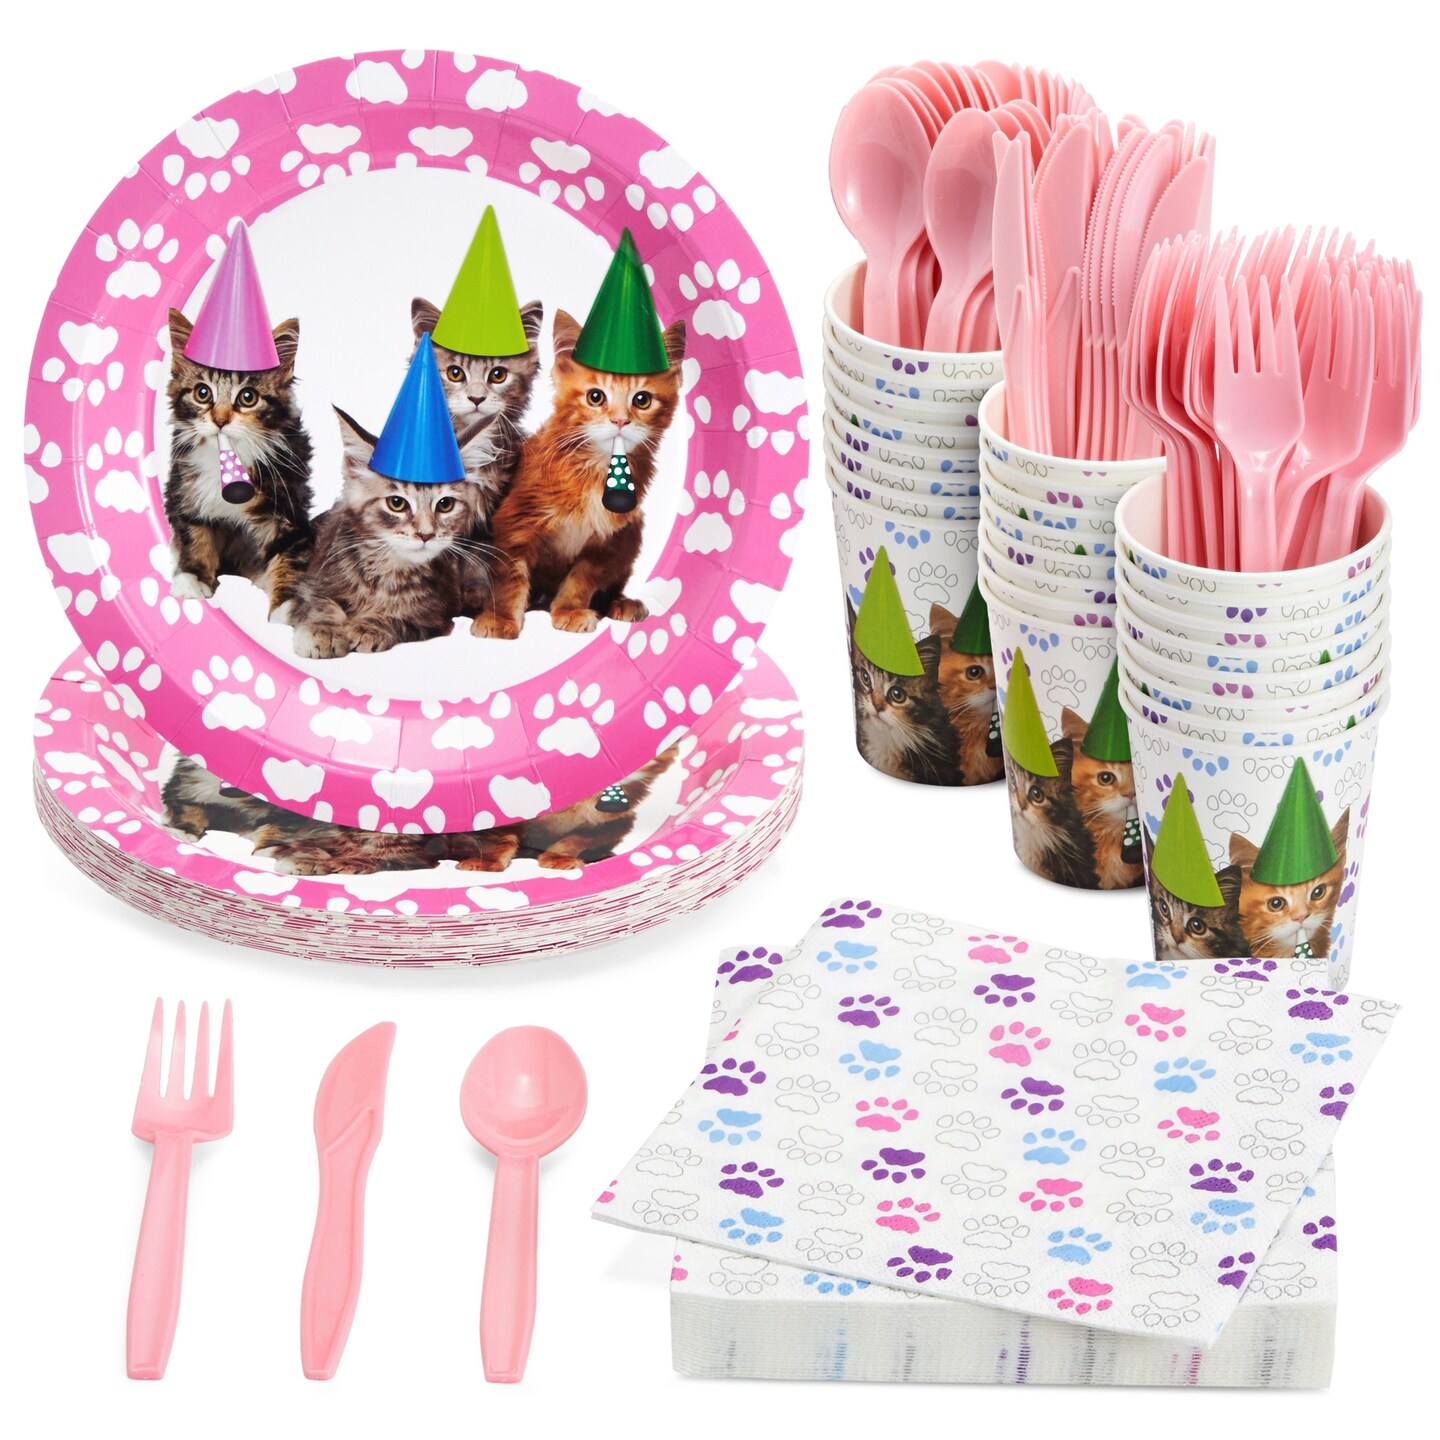 144 Pieces of Kitten Party Supplies with Cat Birthday Paper Plates, Napkins, Cups, and Cutlery (Serves 24)